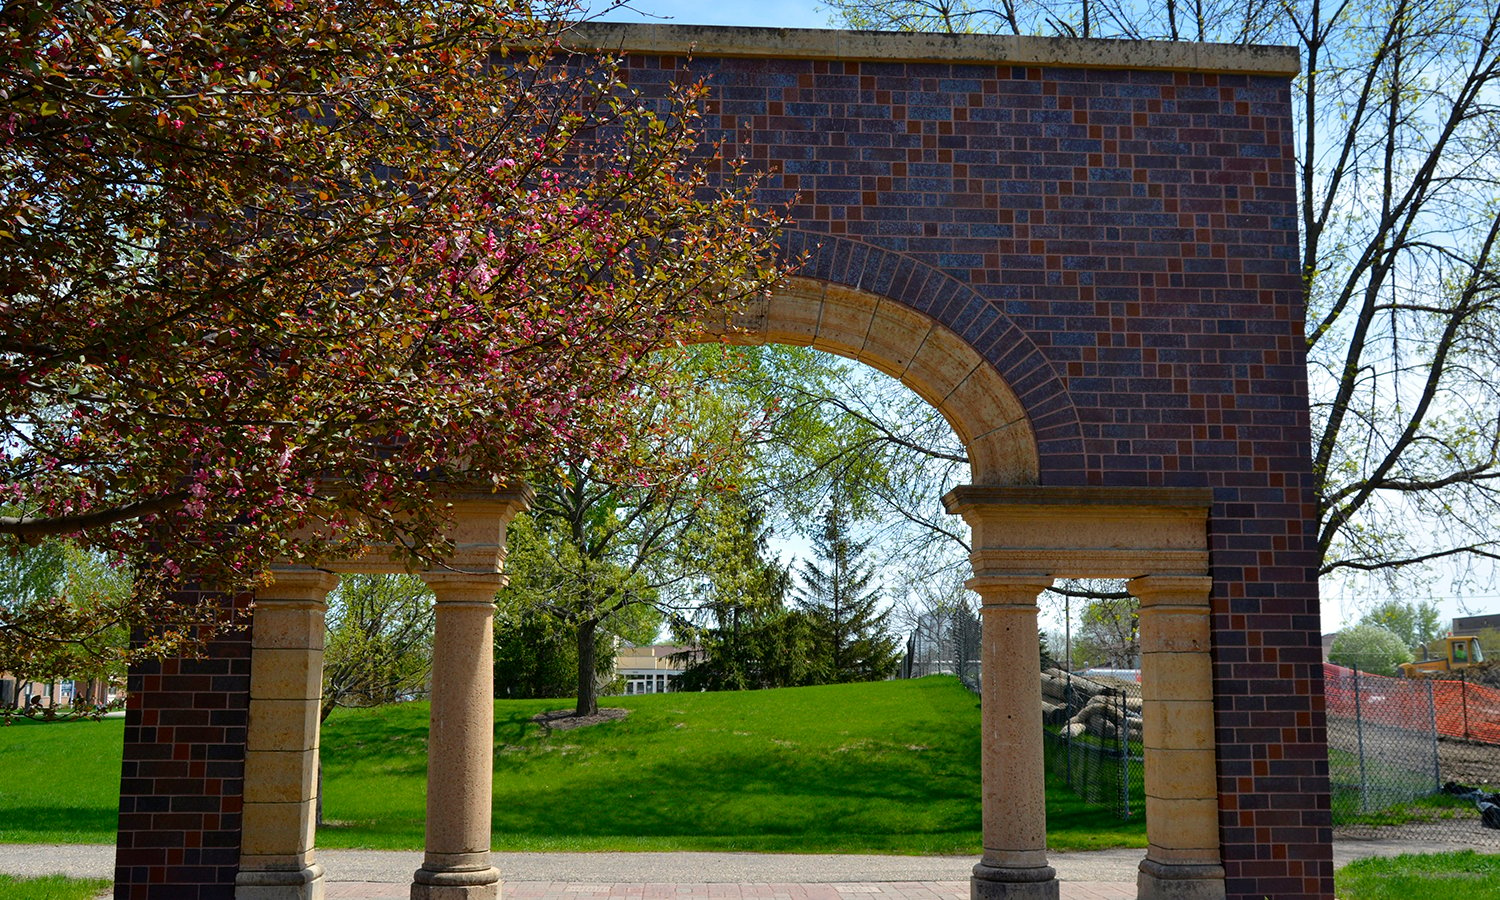 Archway with trees